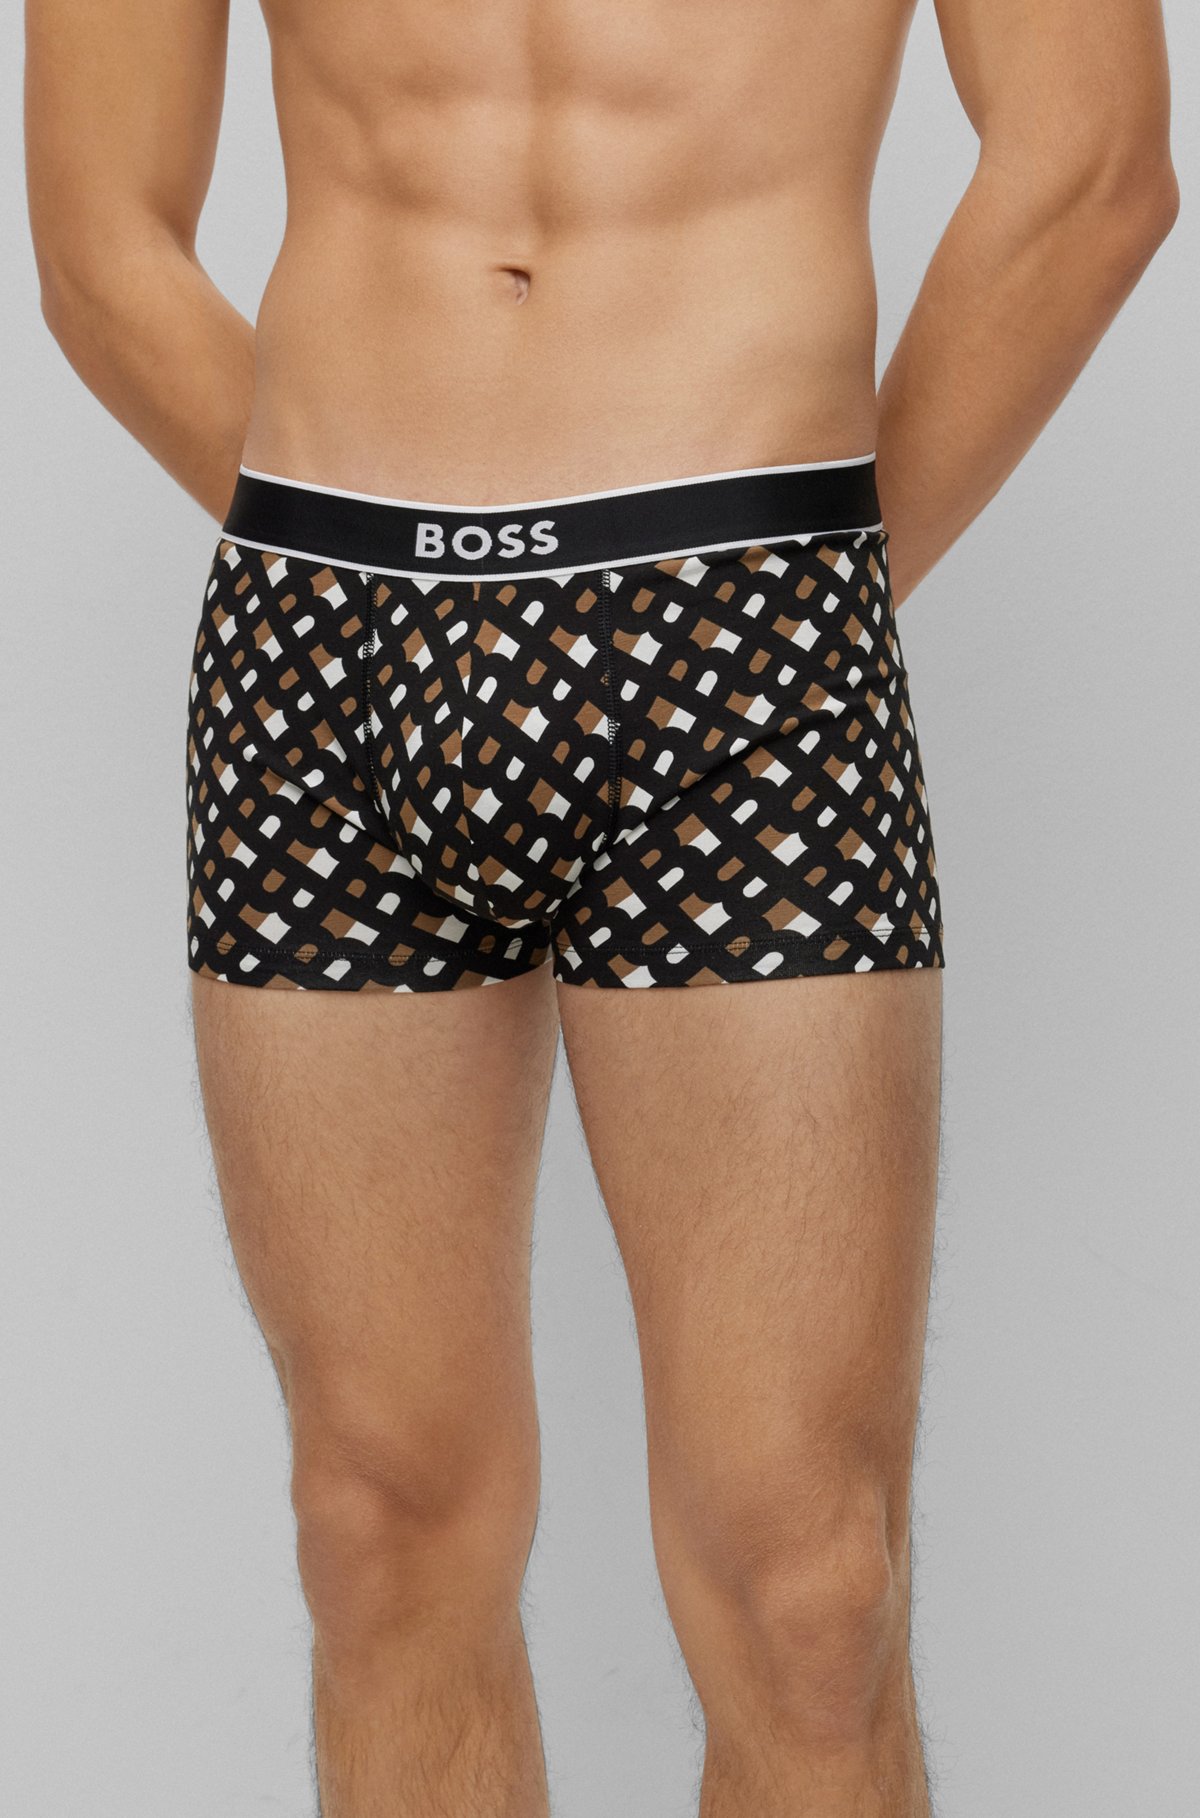 Regular-rise trunks in stretch cotton with seasonal print, Black Patterned